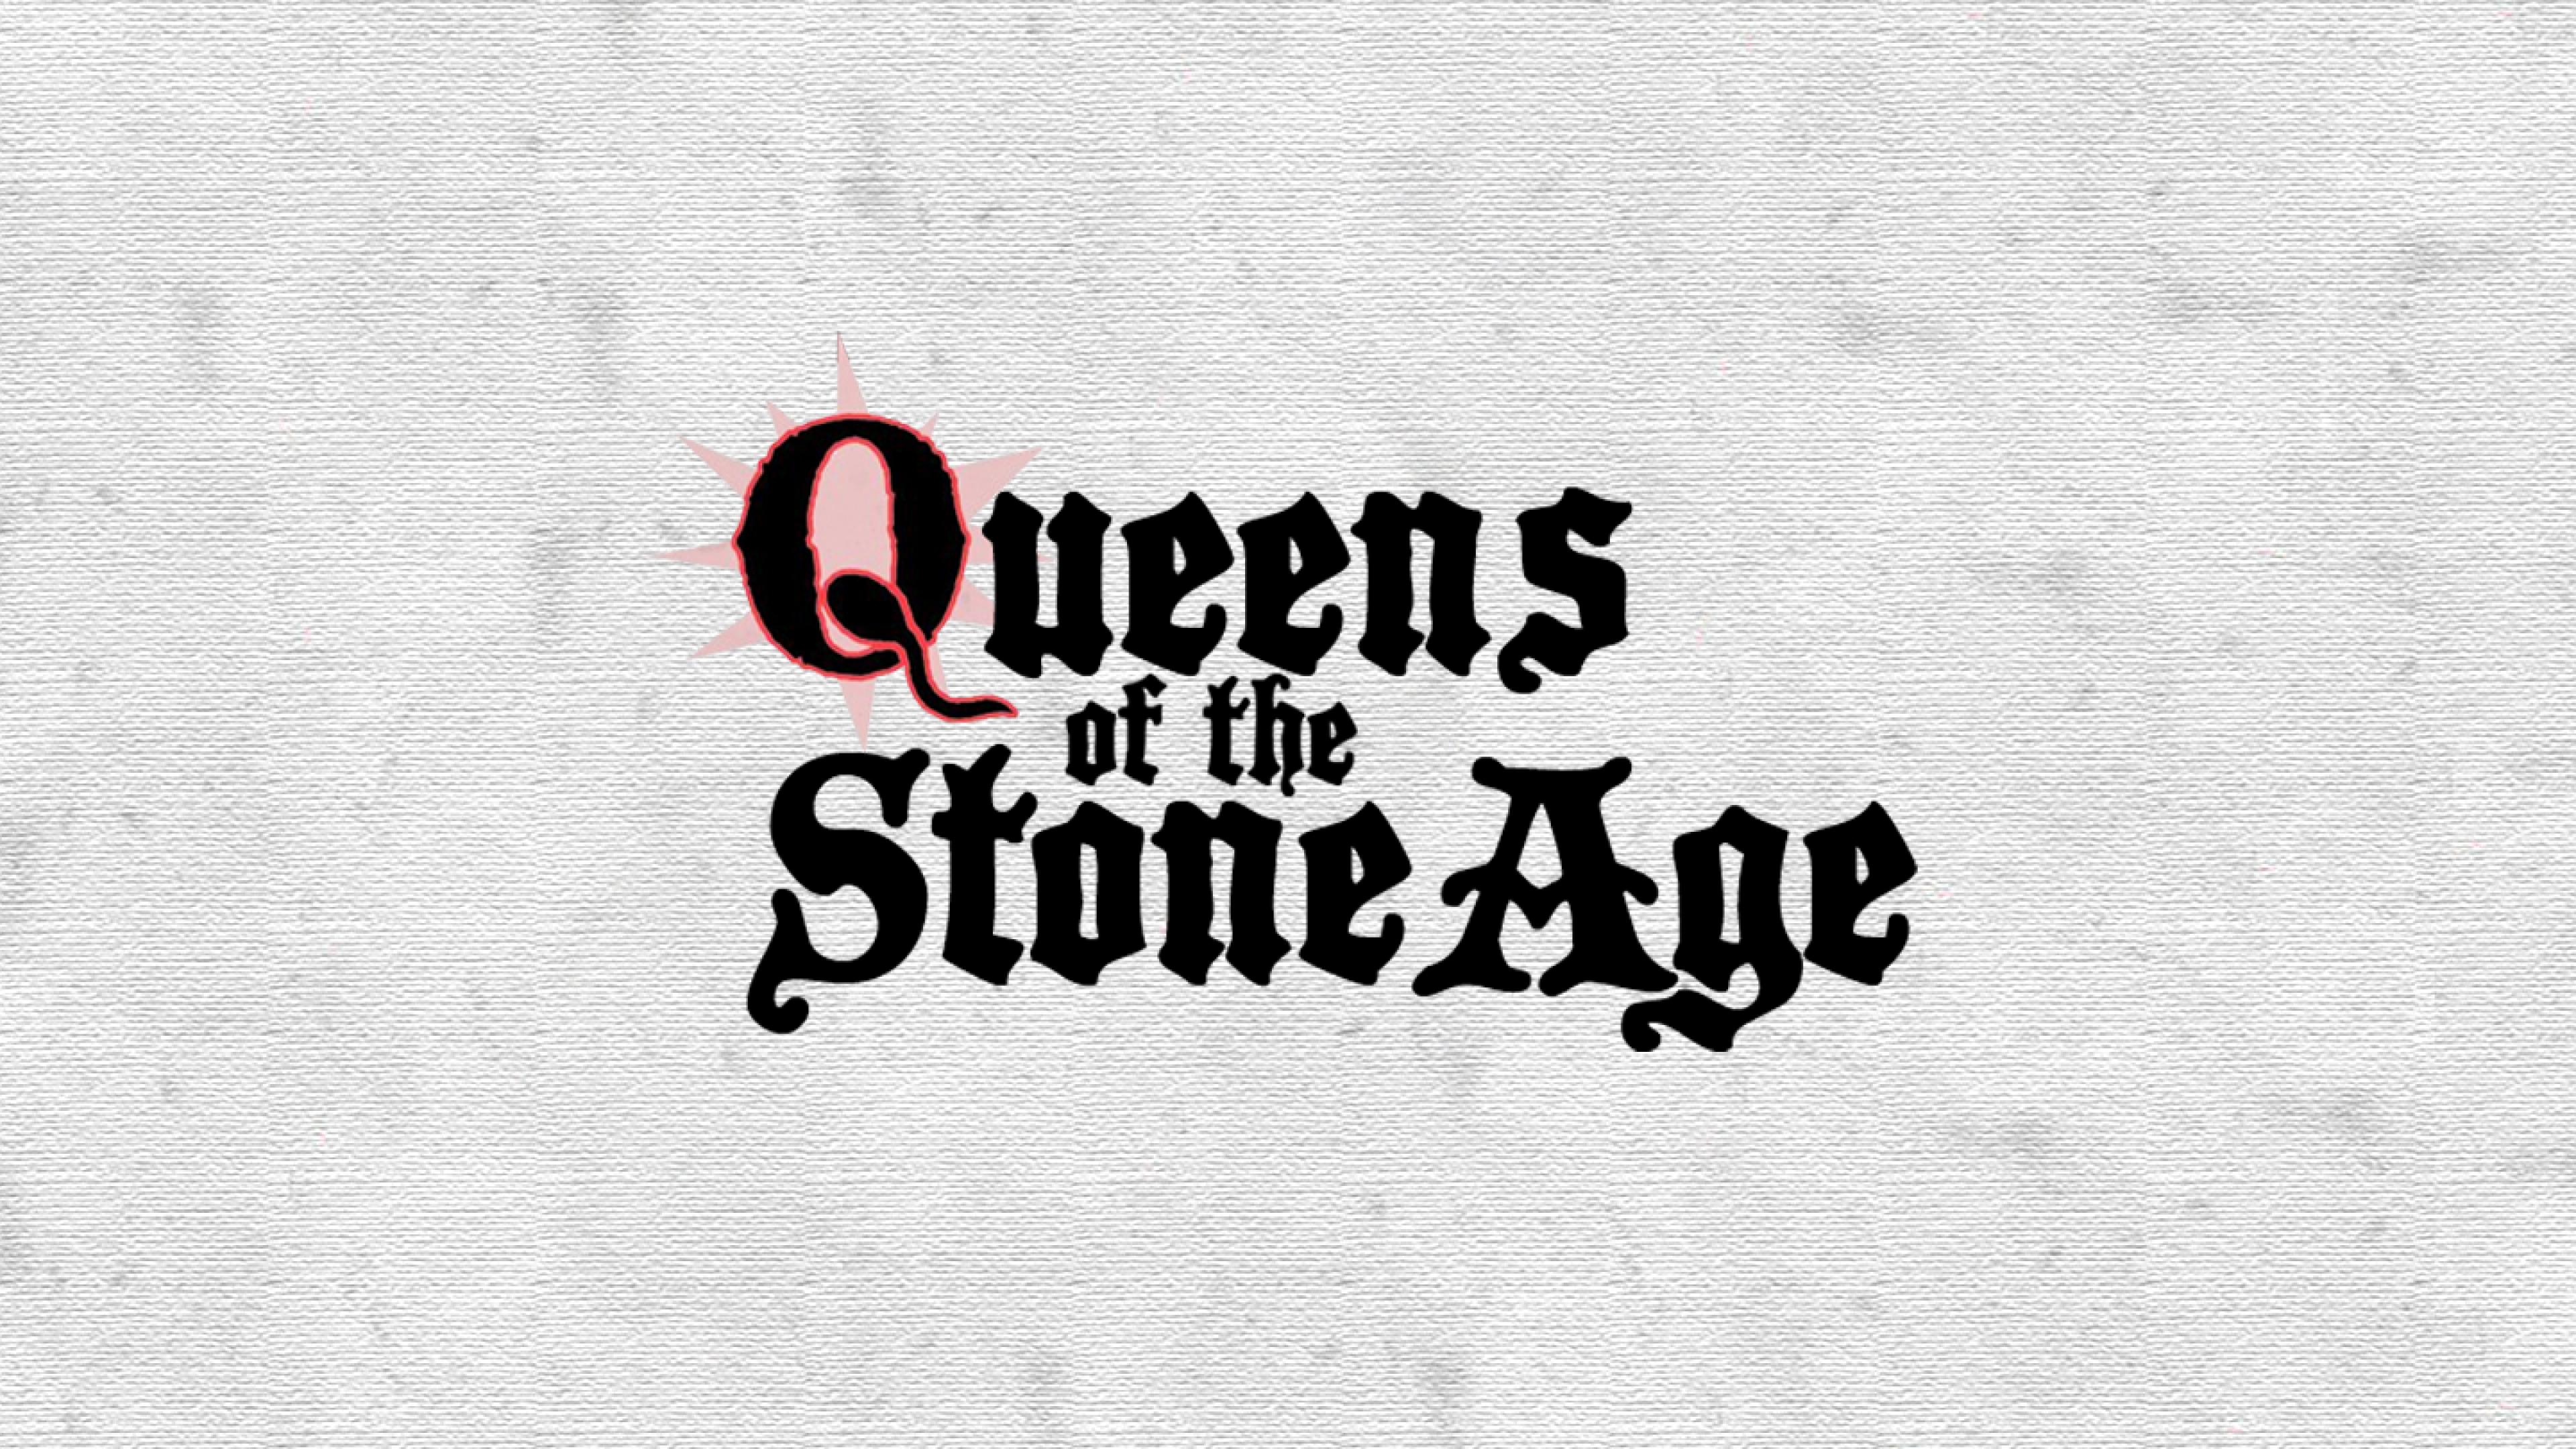 Music Queens Of The Stone Age Band HD Wallpaper Dance